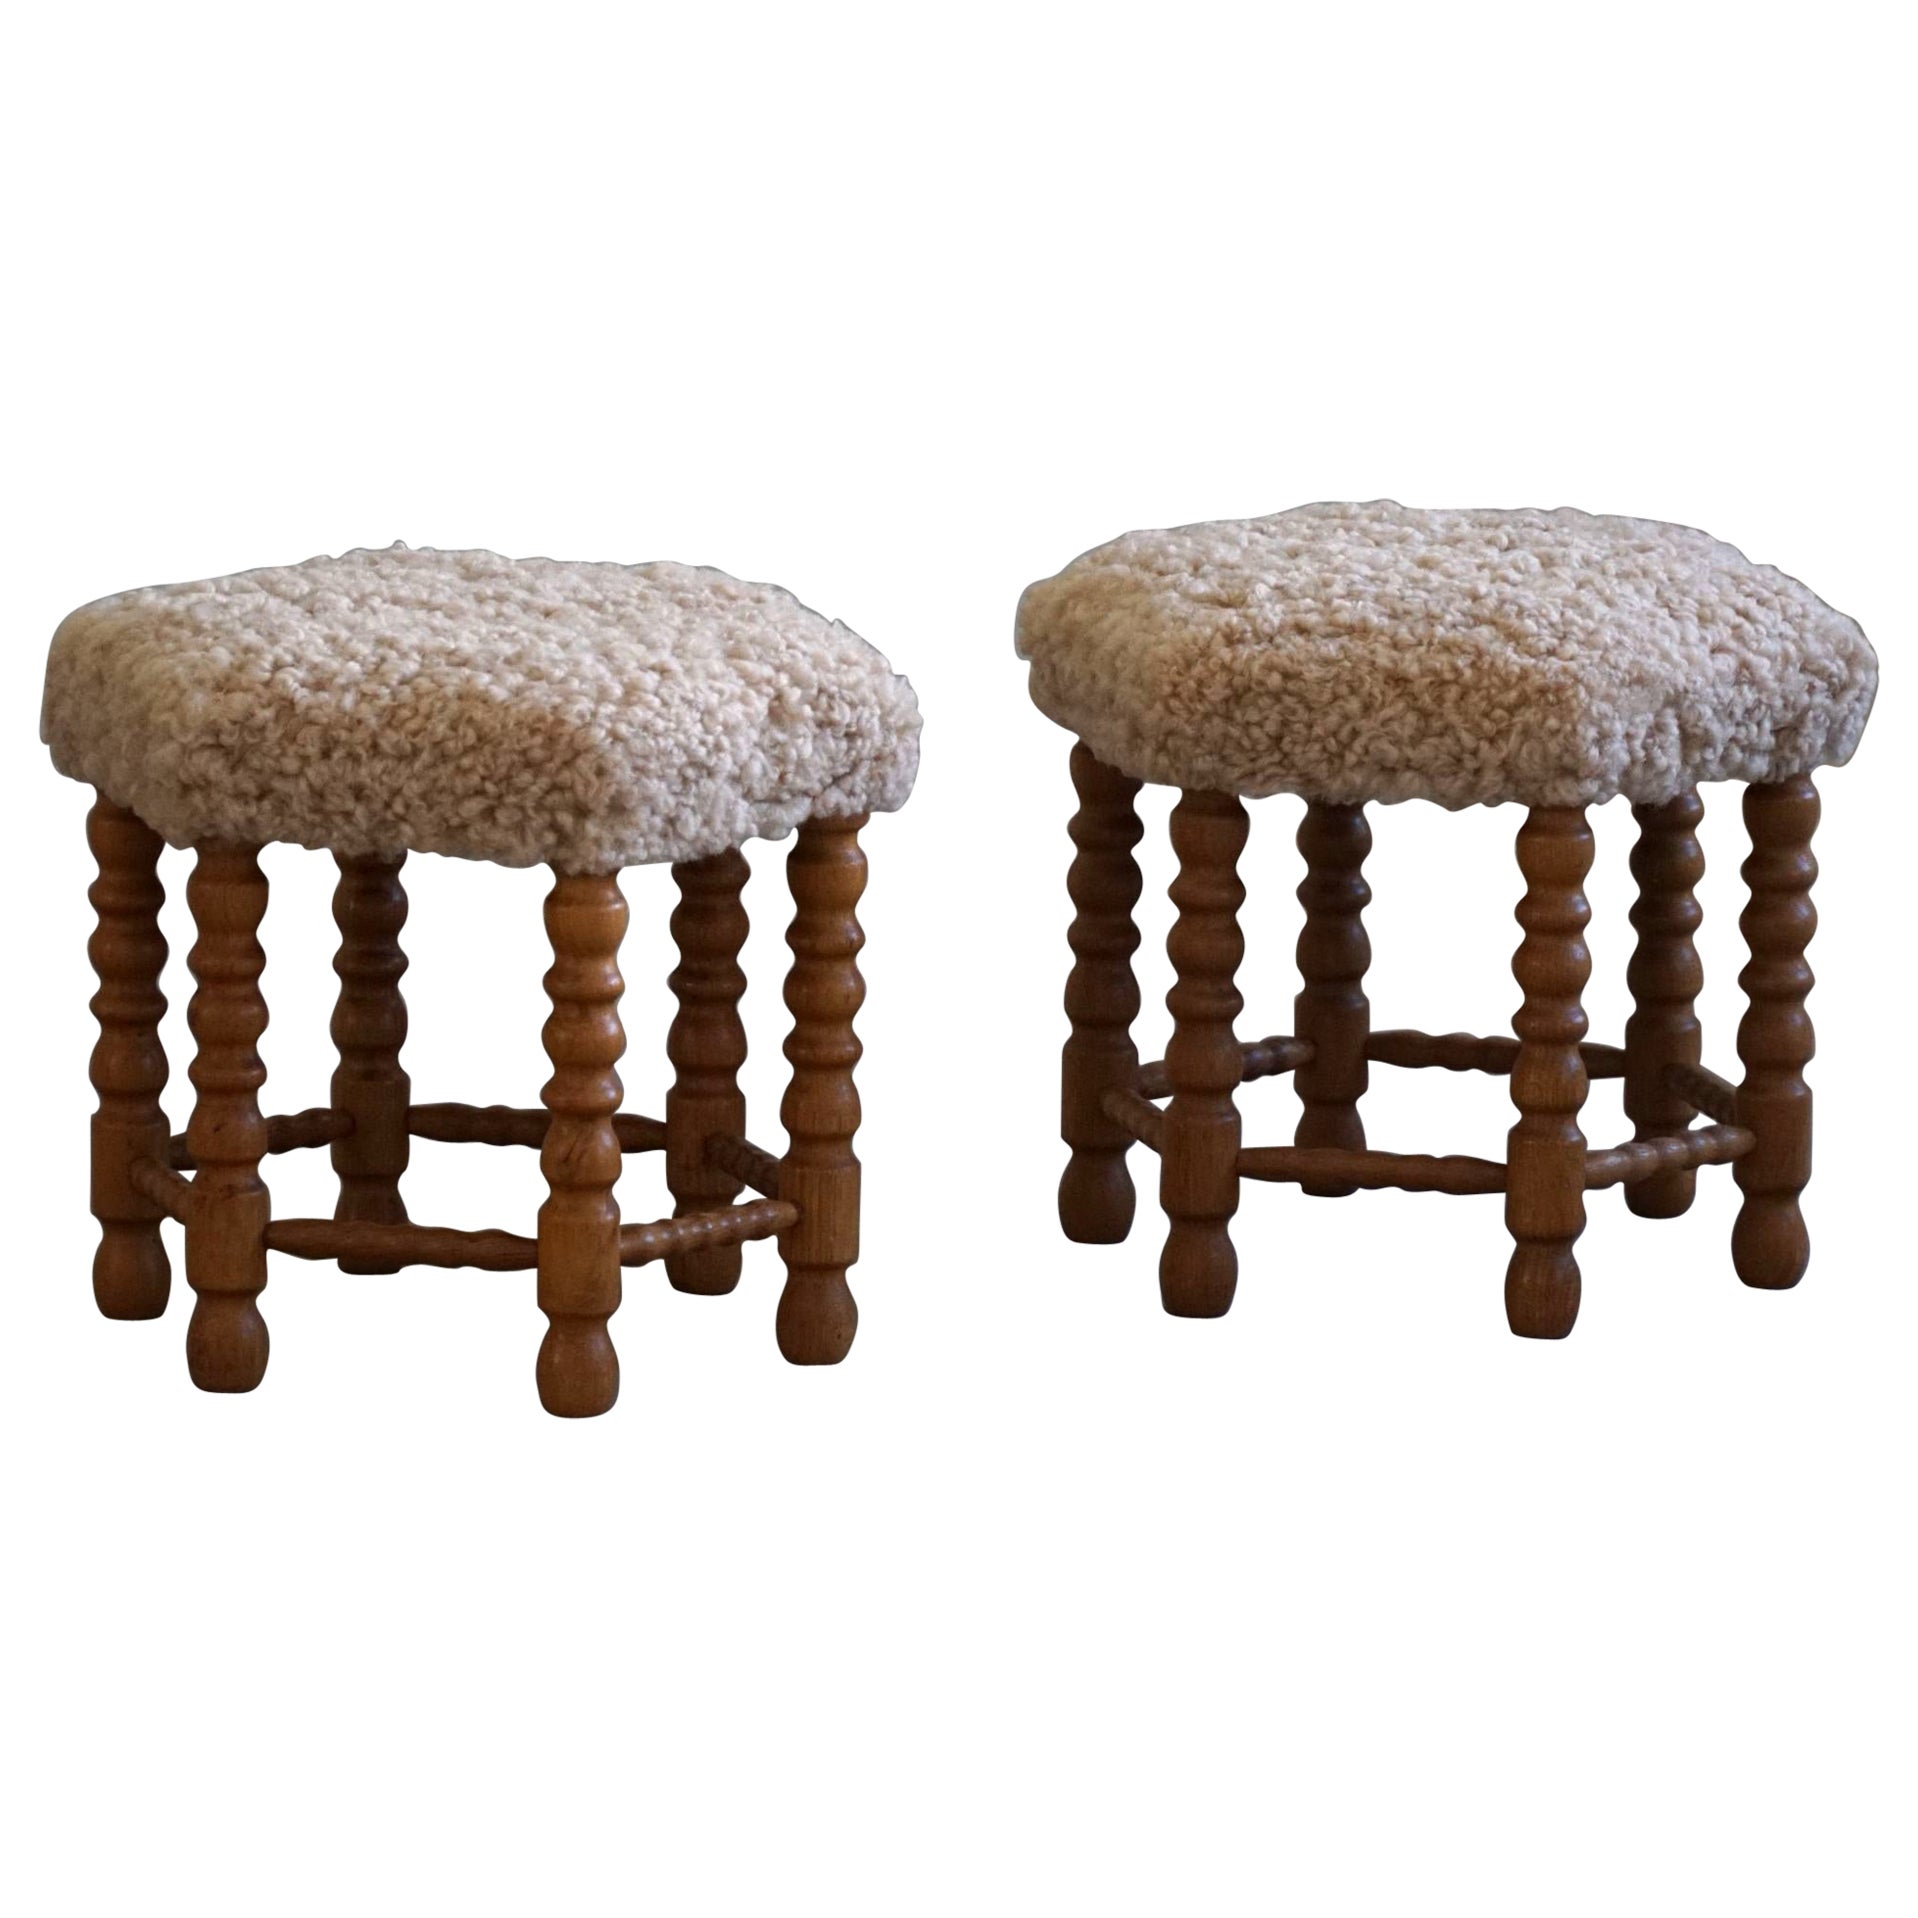 Pair of Stools in Oak, Reupholstered in Lambswool, Danish Cabinetmaker, 1950s For Sale